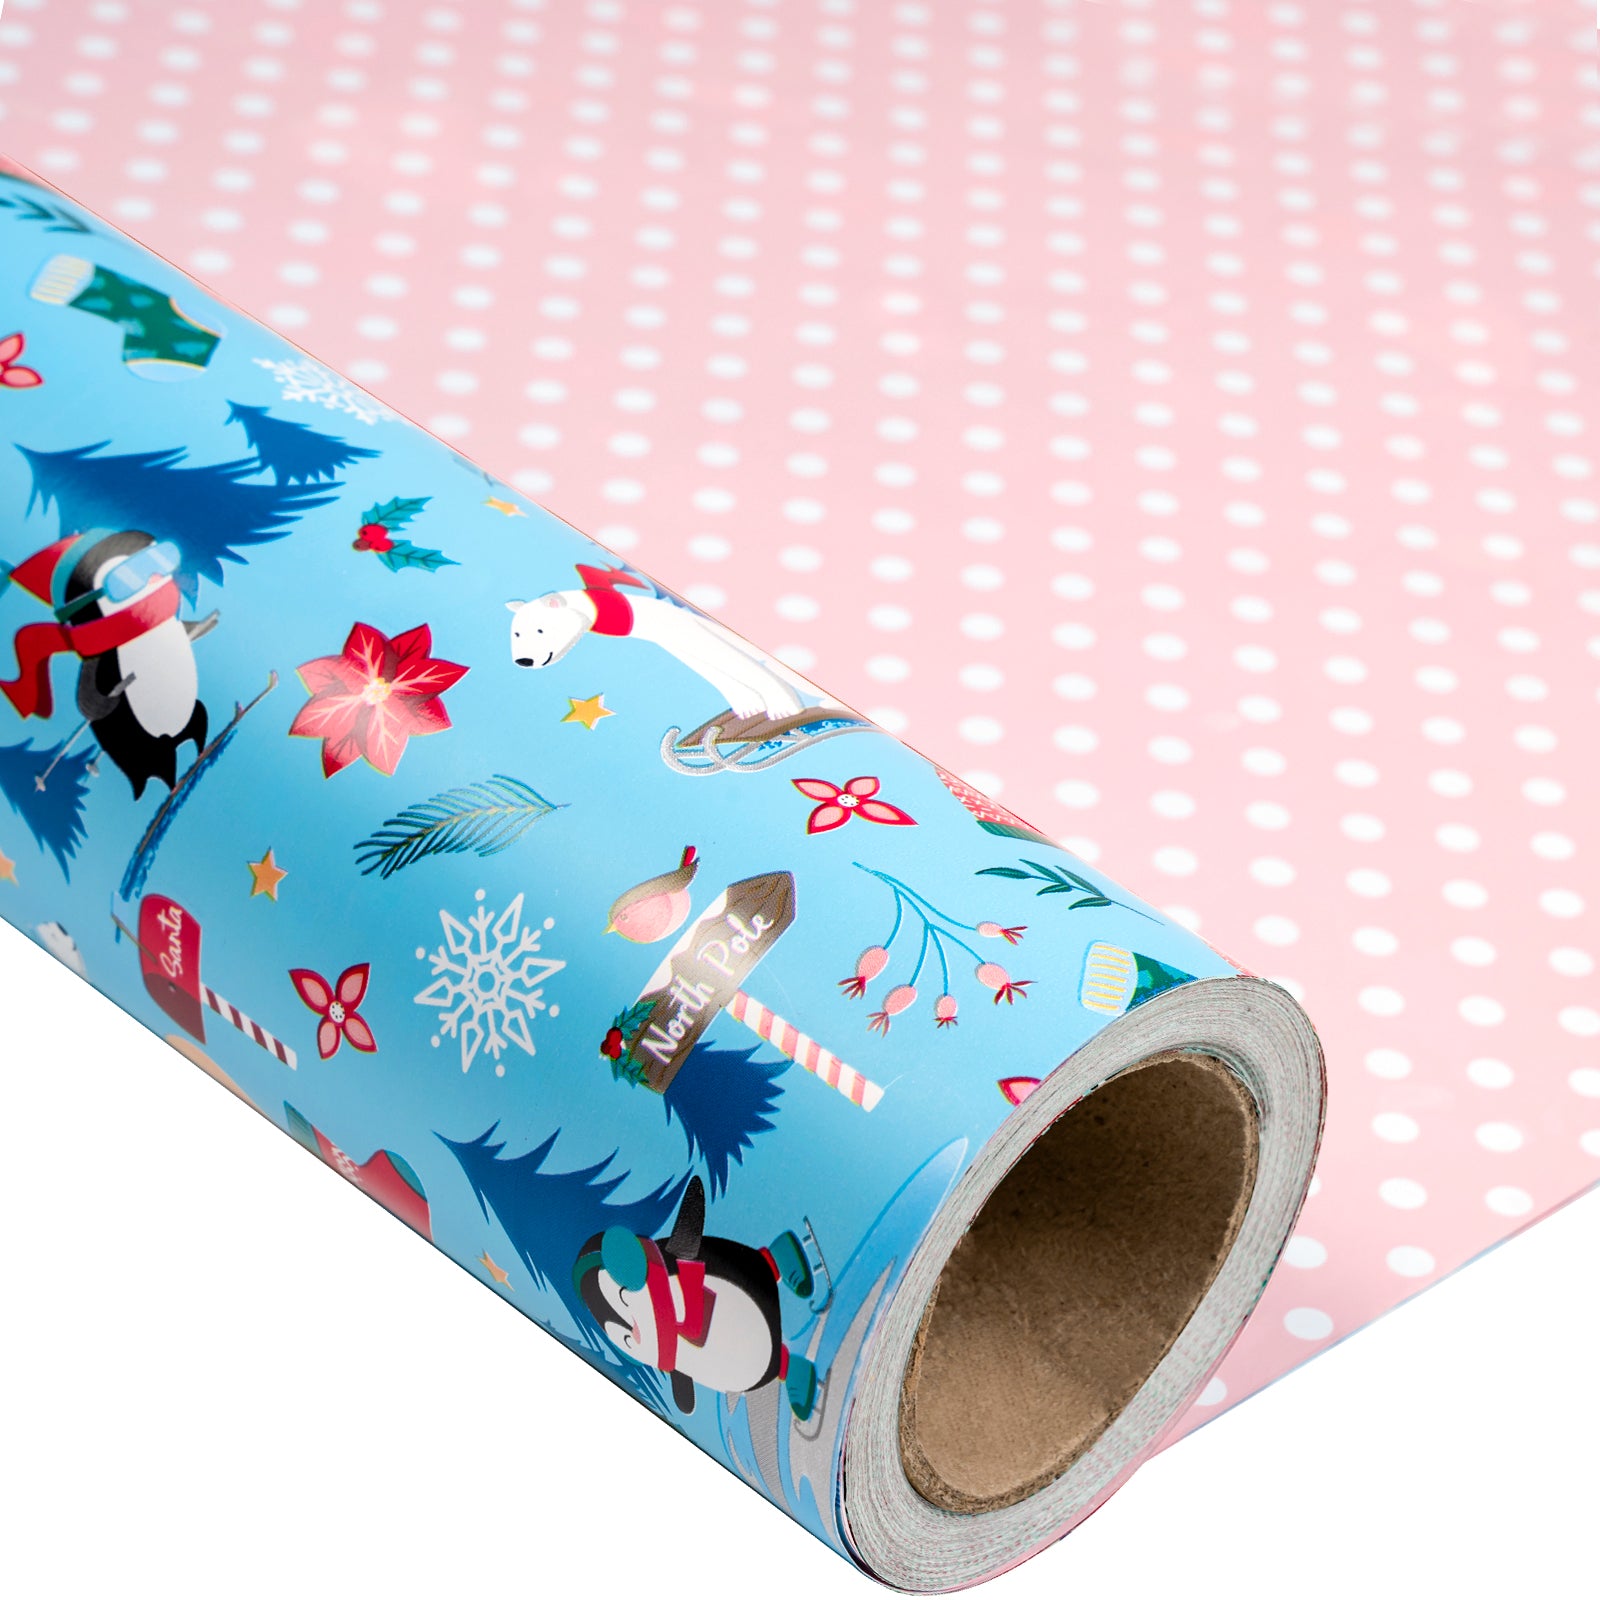 Northern Christmas Wrapping Paper Roll with White Polka Dots Printed on Pink Background on Reverse Wholesale Wrapholic